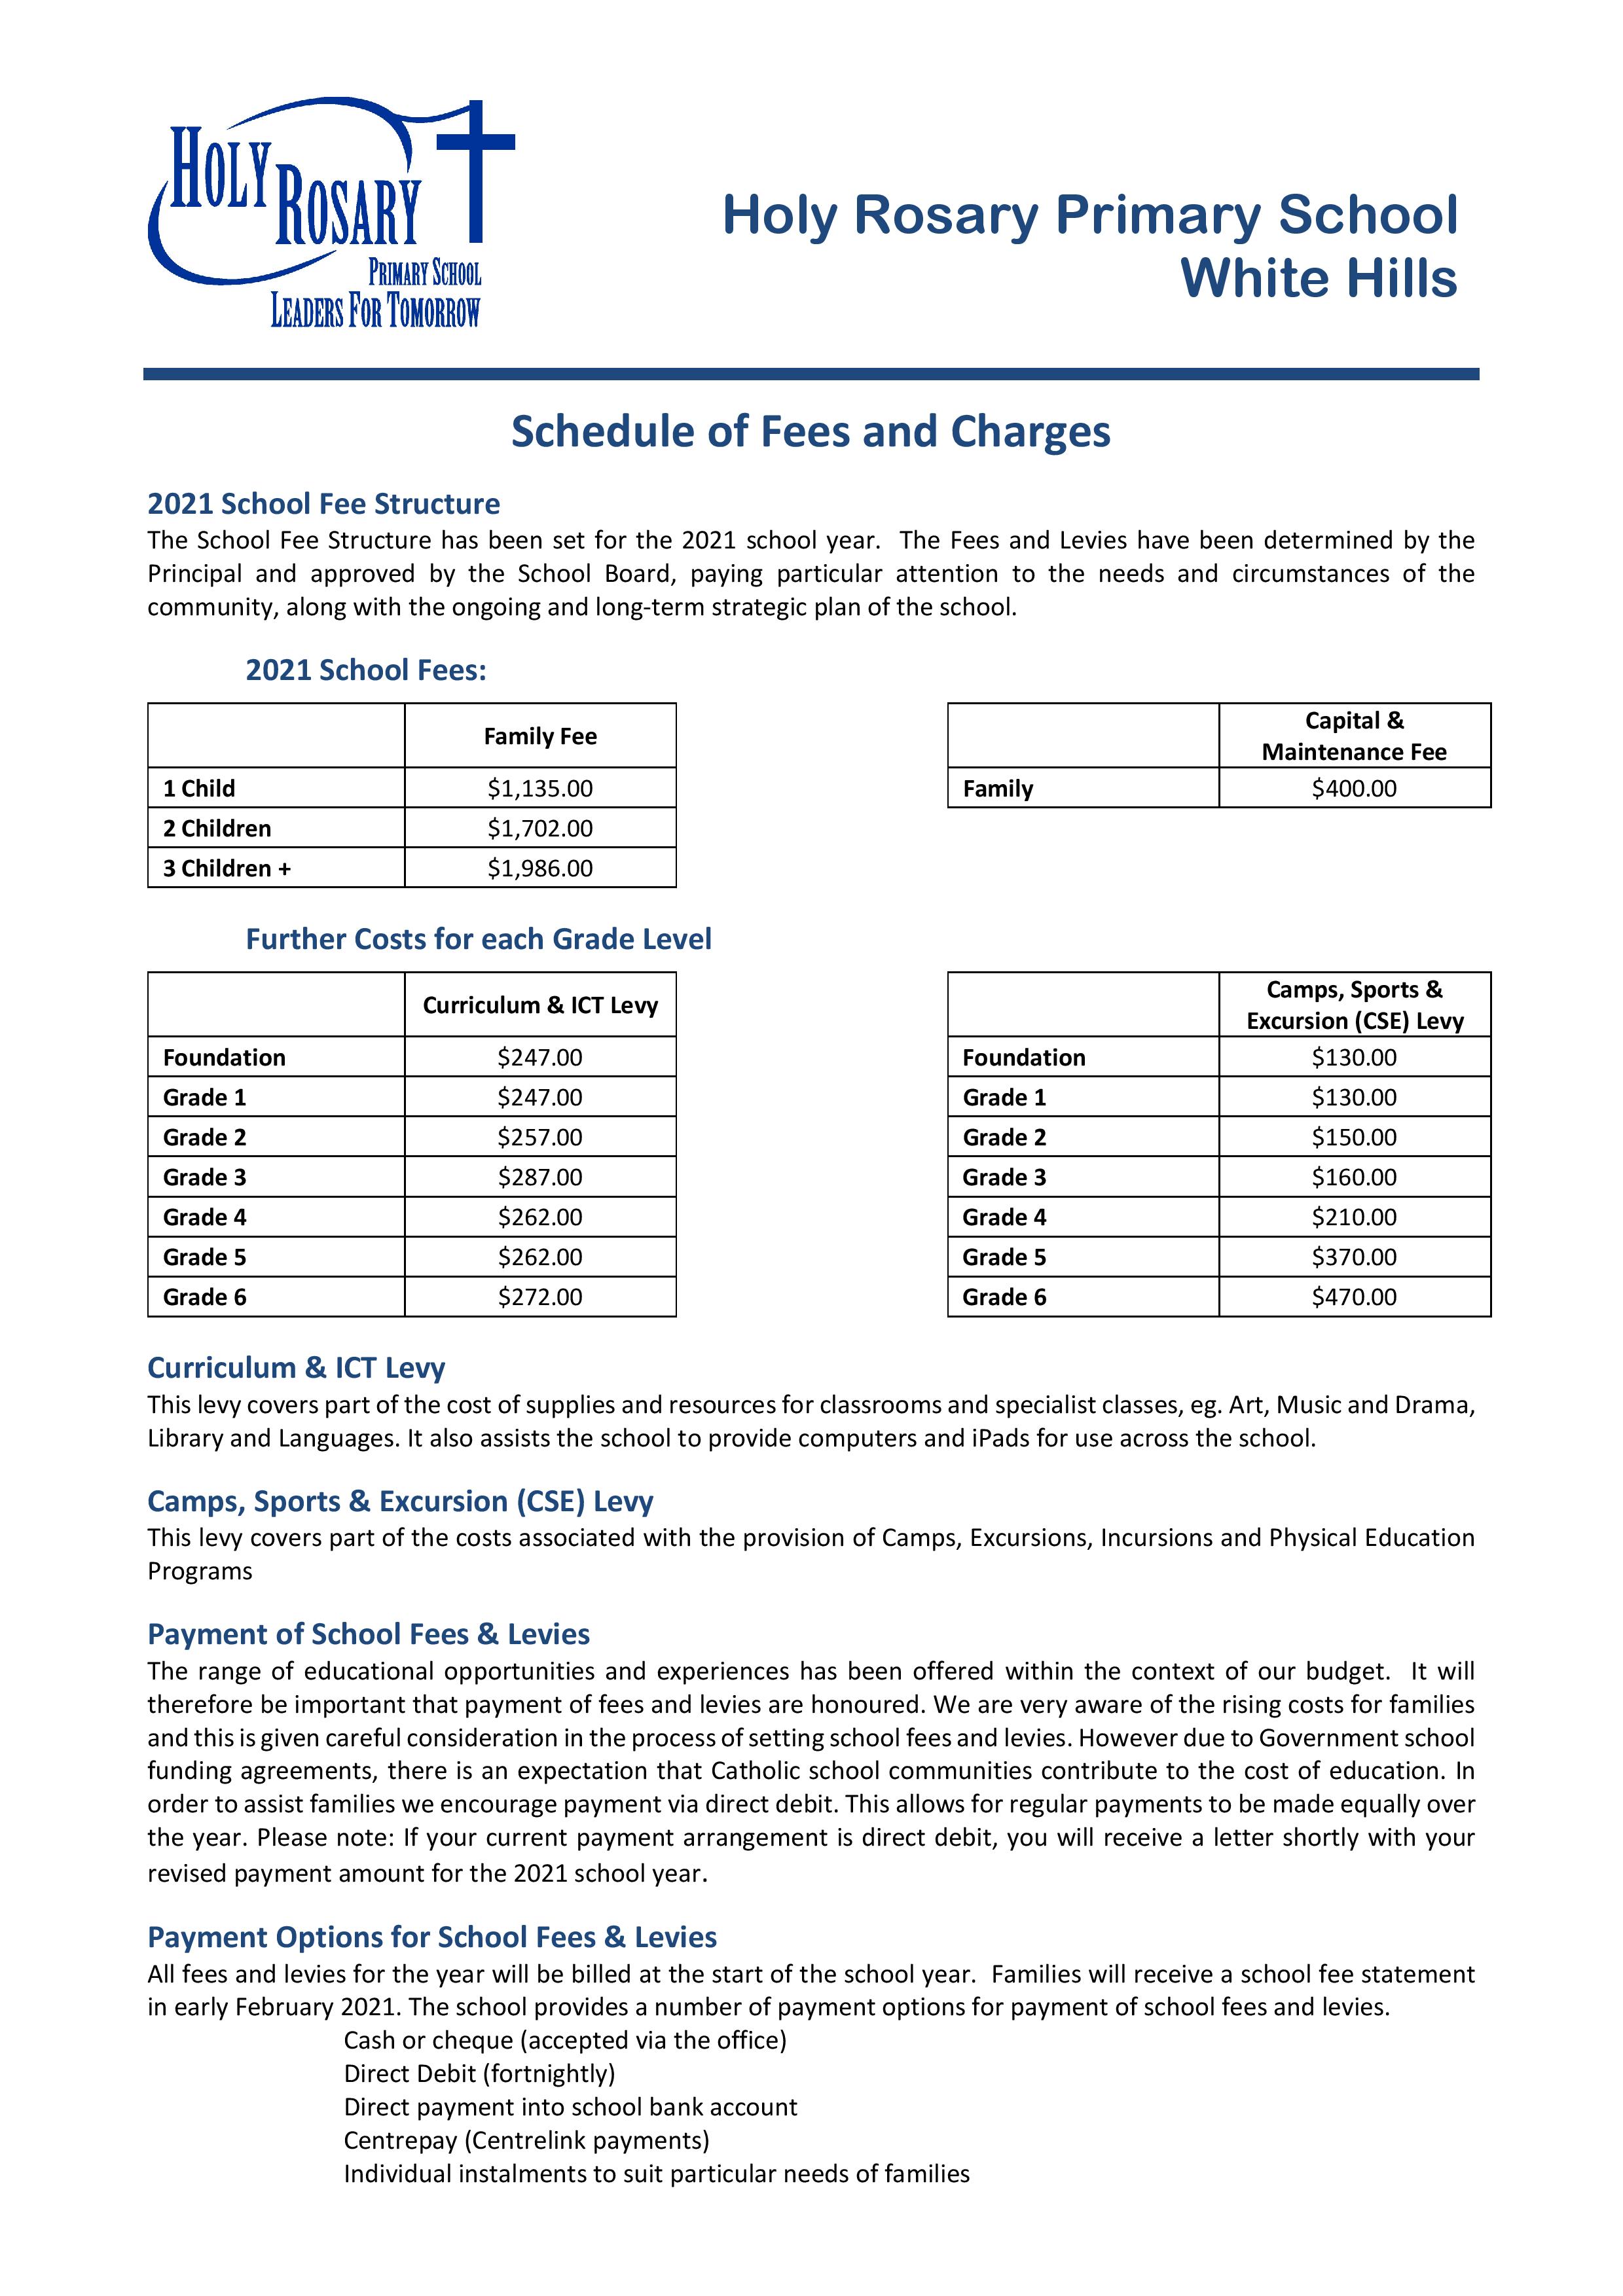 2020 Schedule of Fees Charges